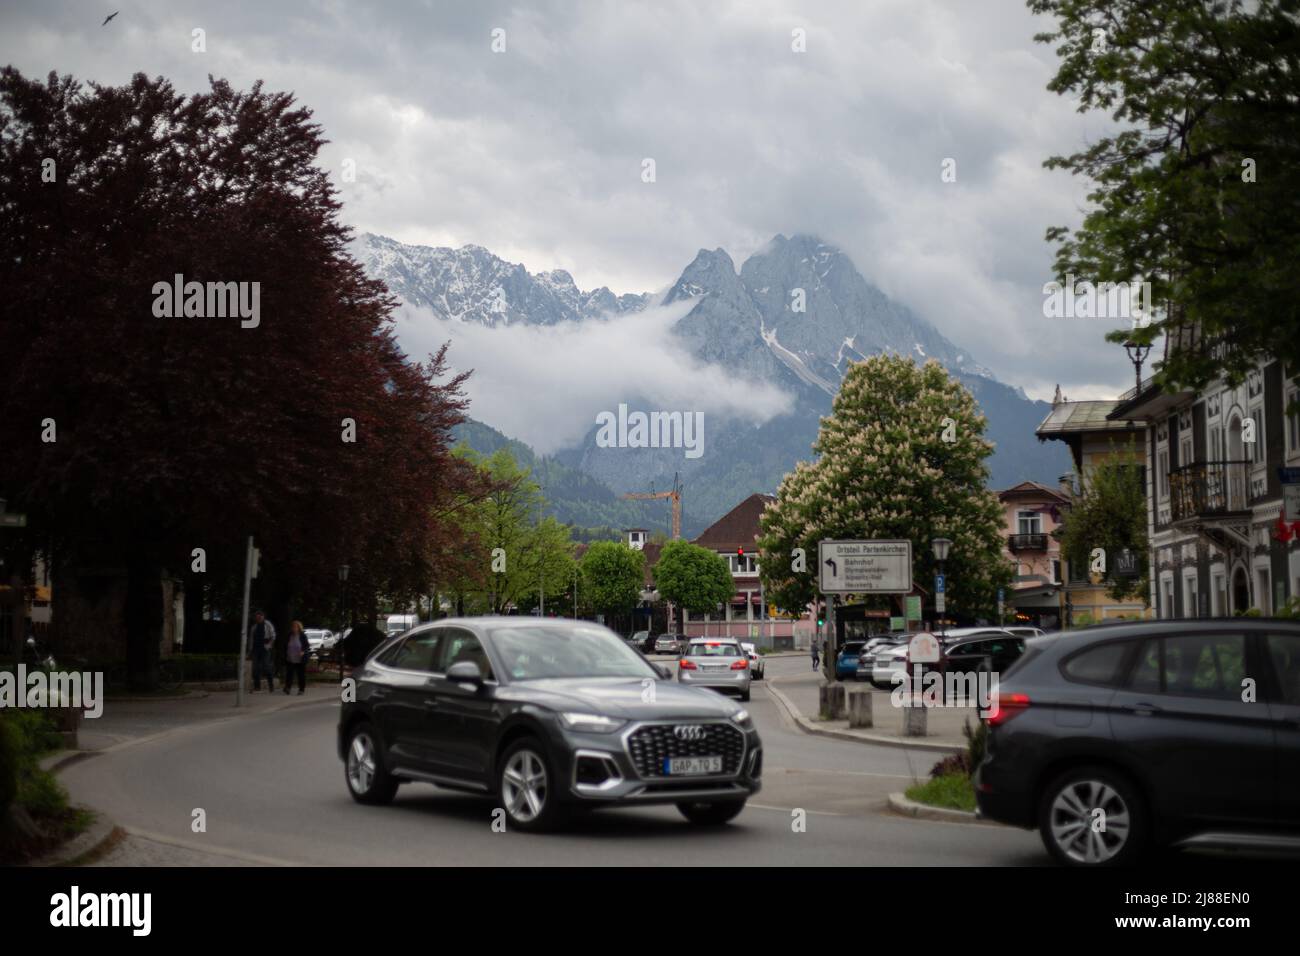 Pedestrian Zone. Garmisch-Partenkirchen has been preapring for the G7 meeting on May 13, 2022 for months. The G7 meeting will take place in Schloss Elmau, near Garmisch-Patenkirchen from June 26 until June 28 2022. (Photo by Alexander Pohl/Sipa USA) Stock Photo